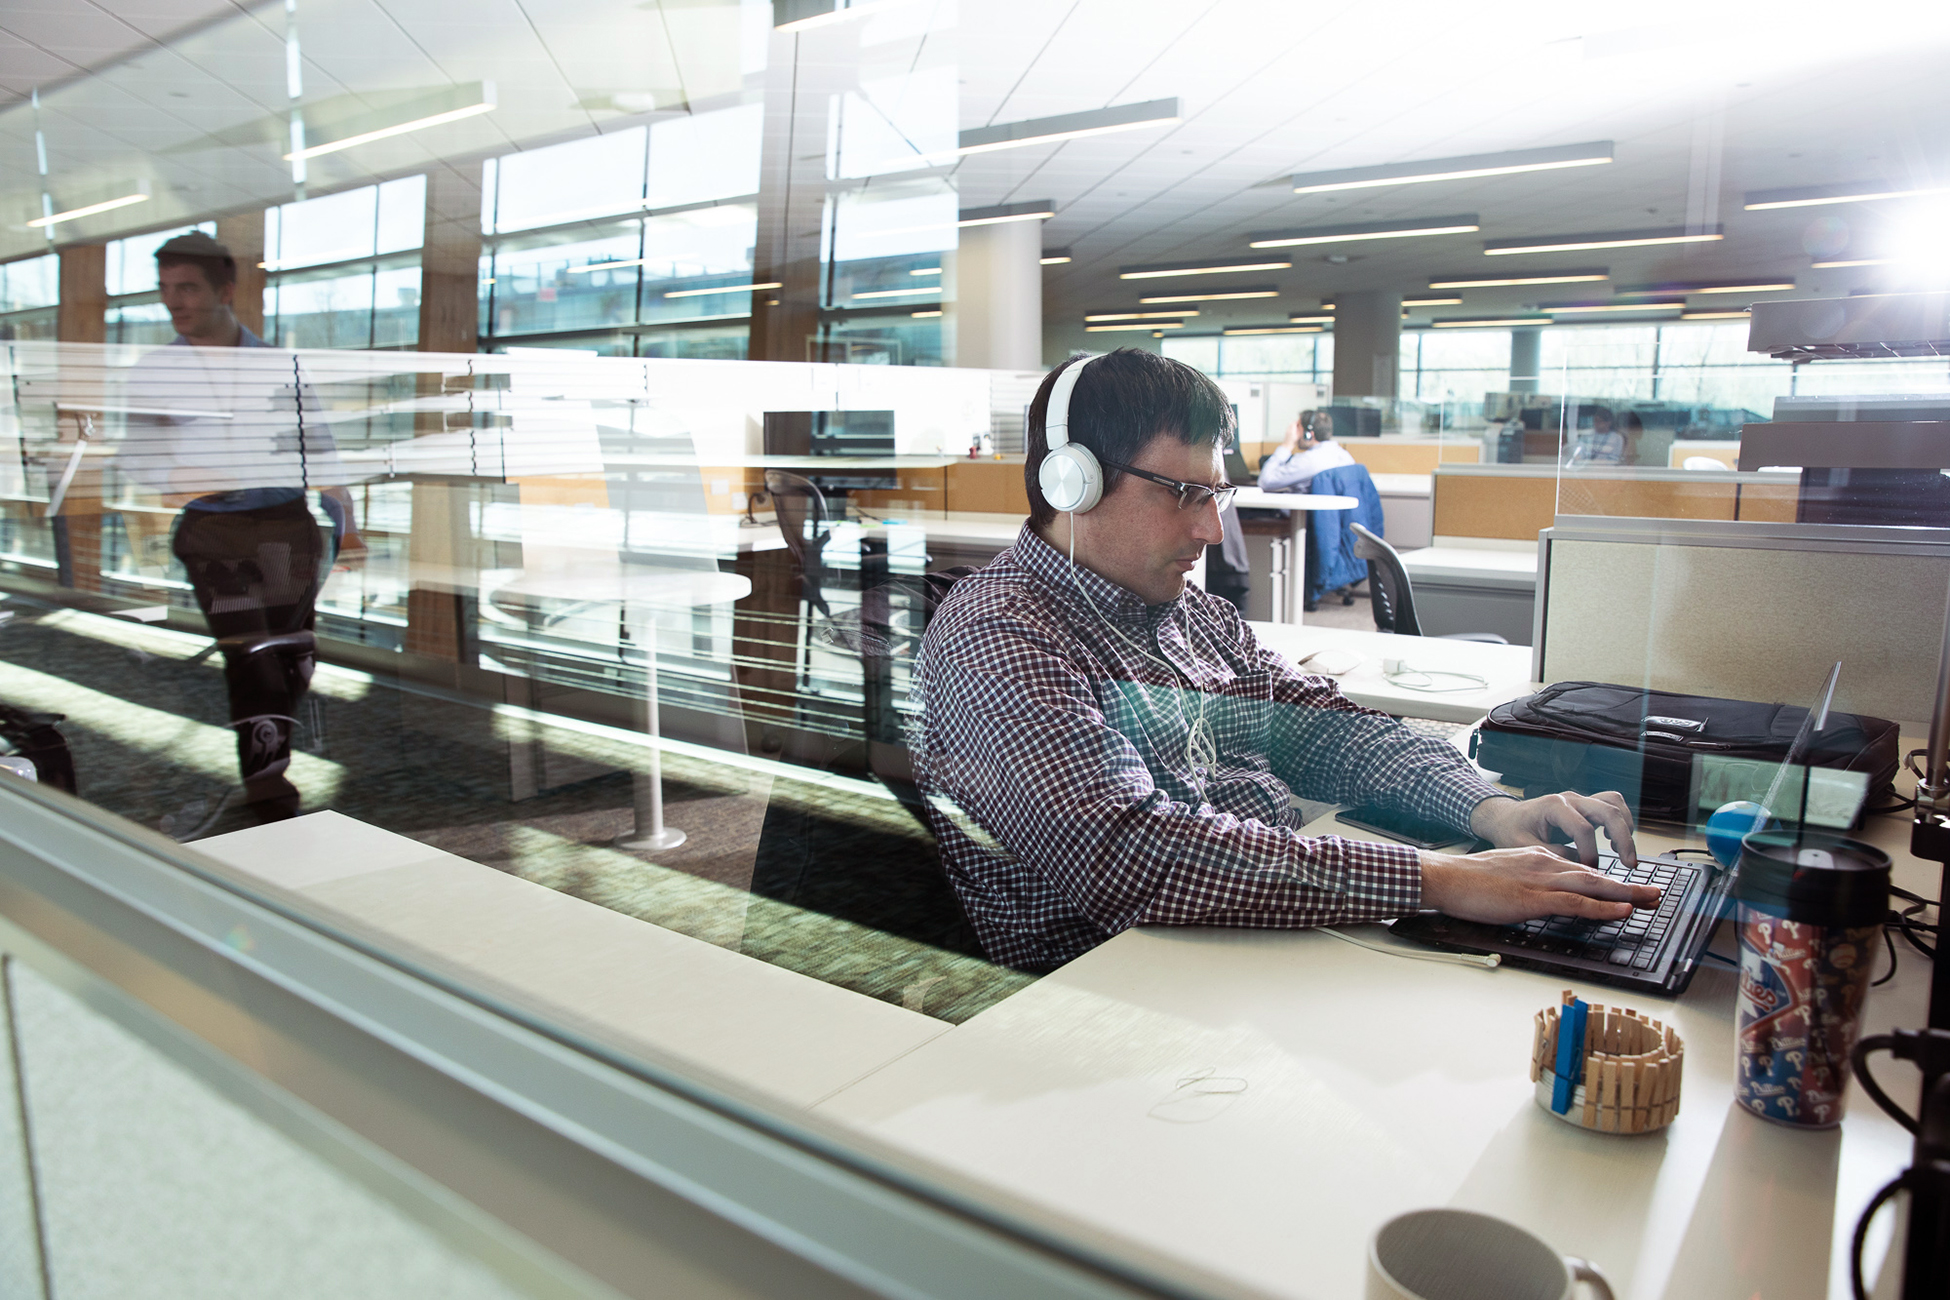 Photo: A white man wearing headphones works on a laptop.